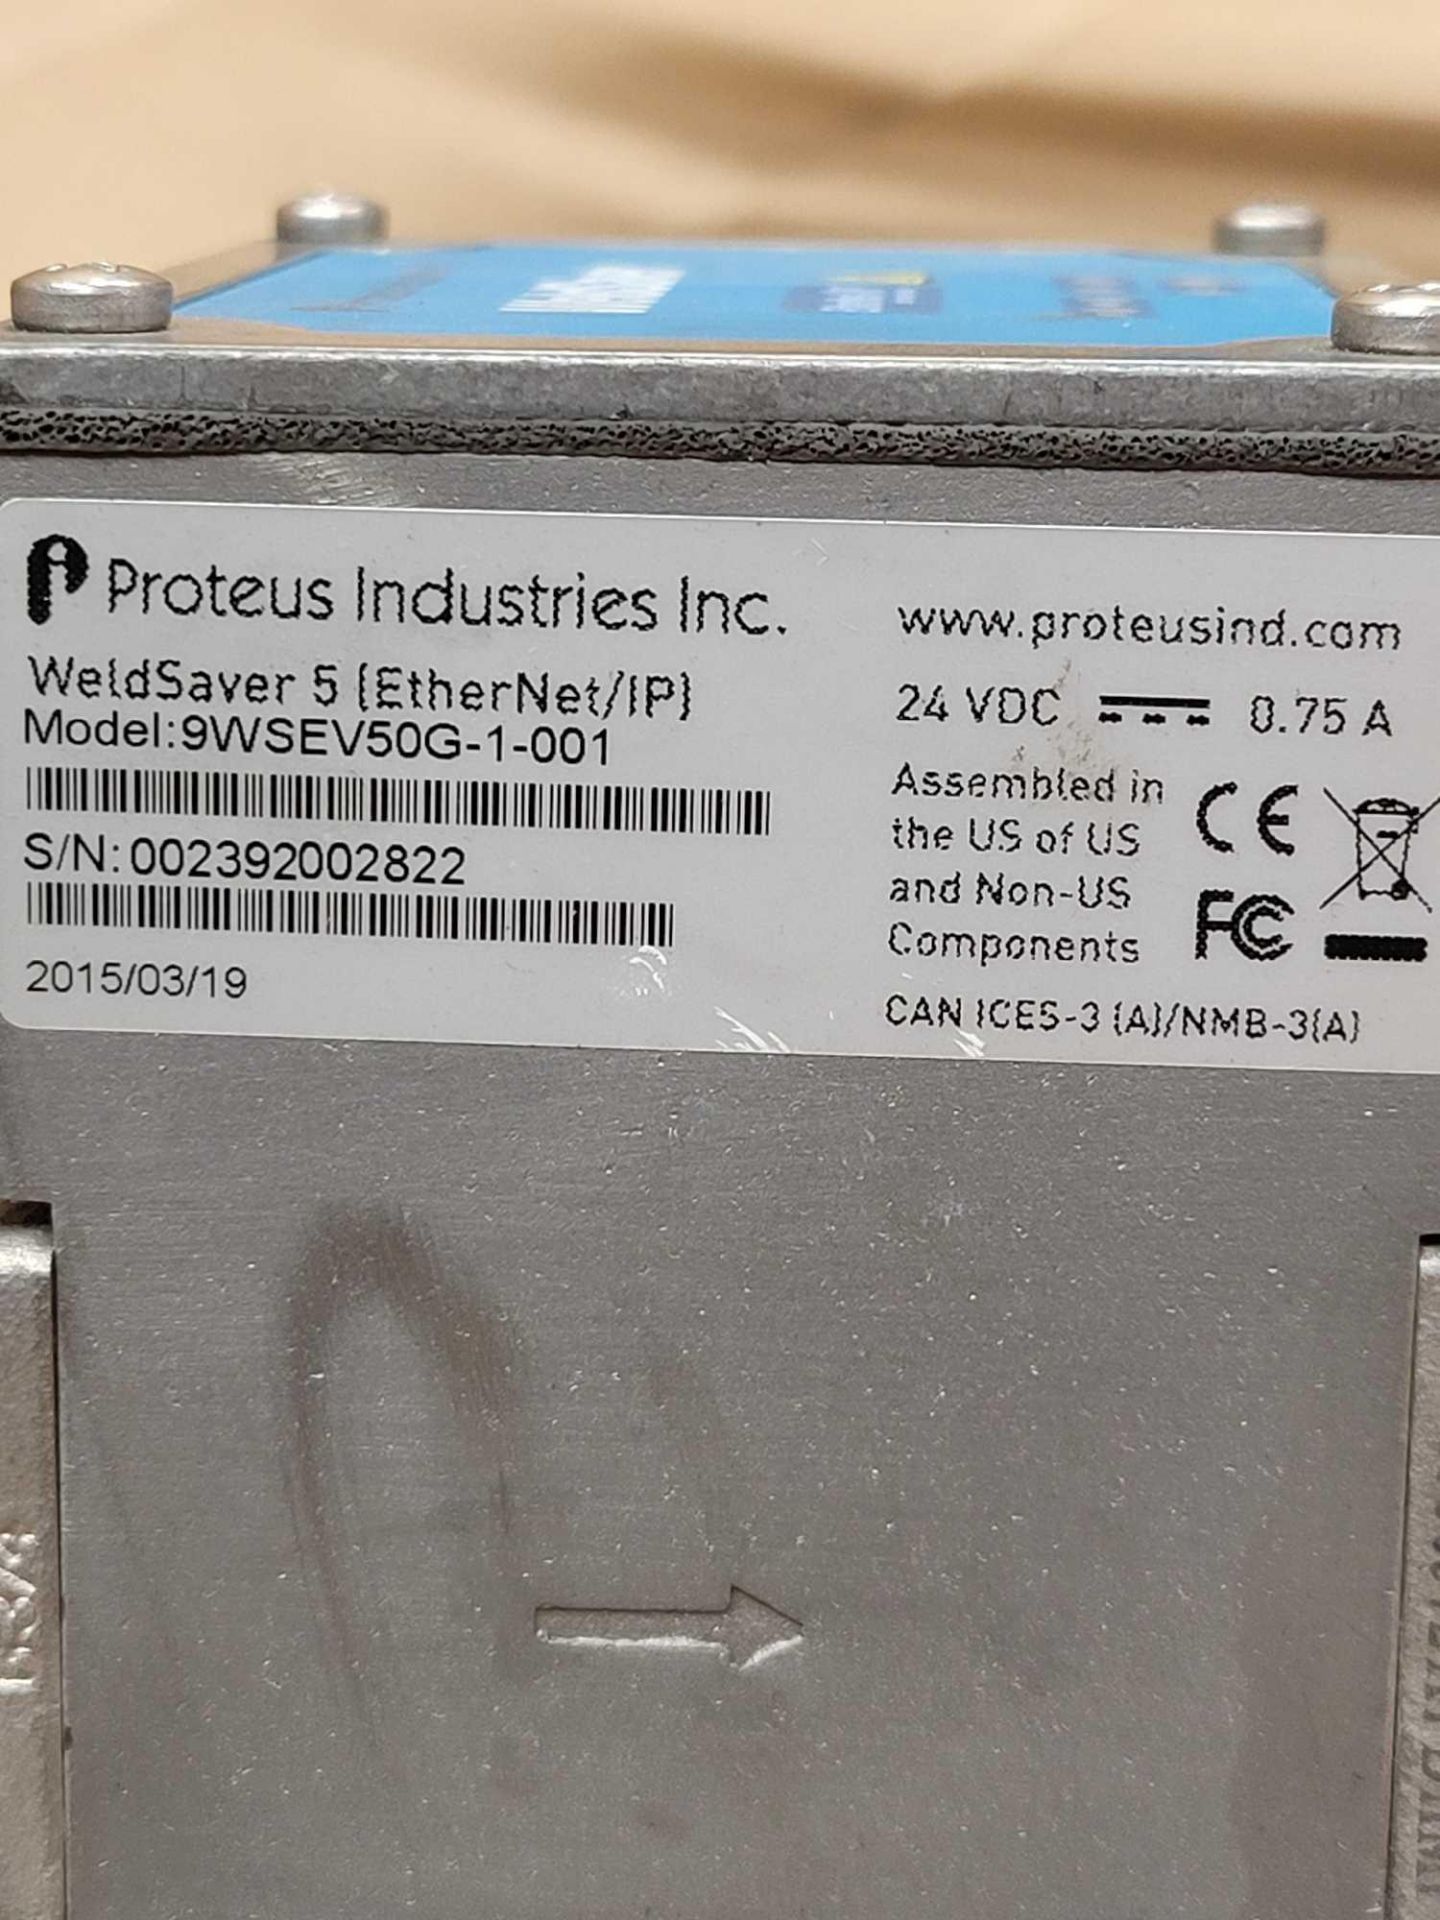 LOT OF 2 PROTEUS INDUSTRIES 9WSEV50G-1-001 with ASSURED AUTOMATION VNC20005-305.90.18M9 and ASSURED - Image 3 of 8